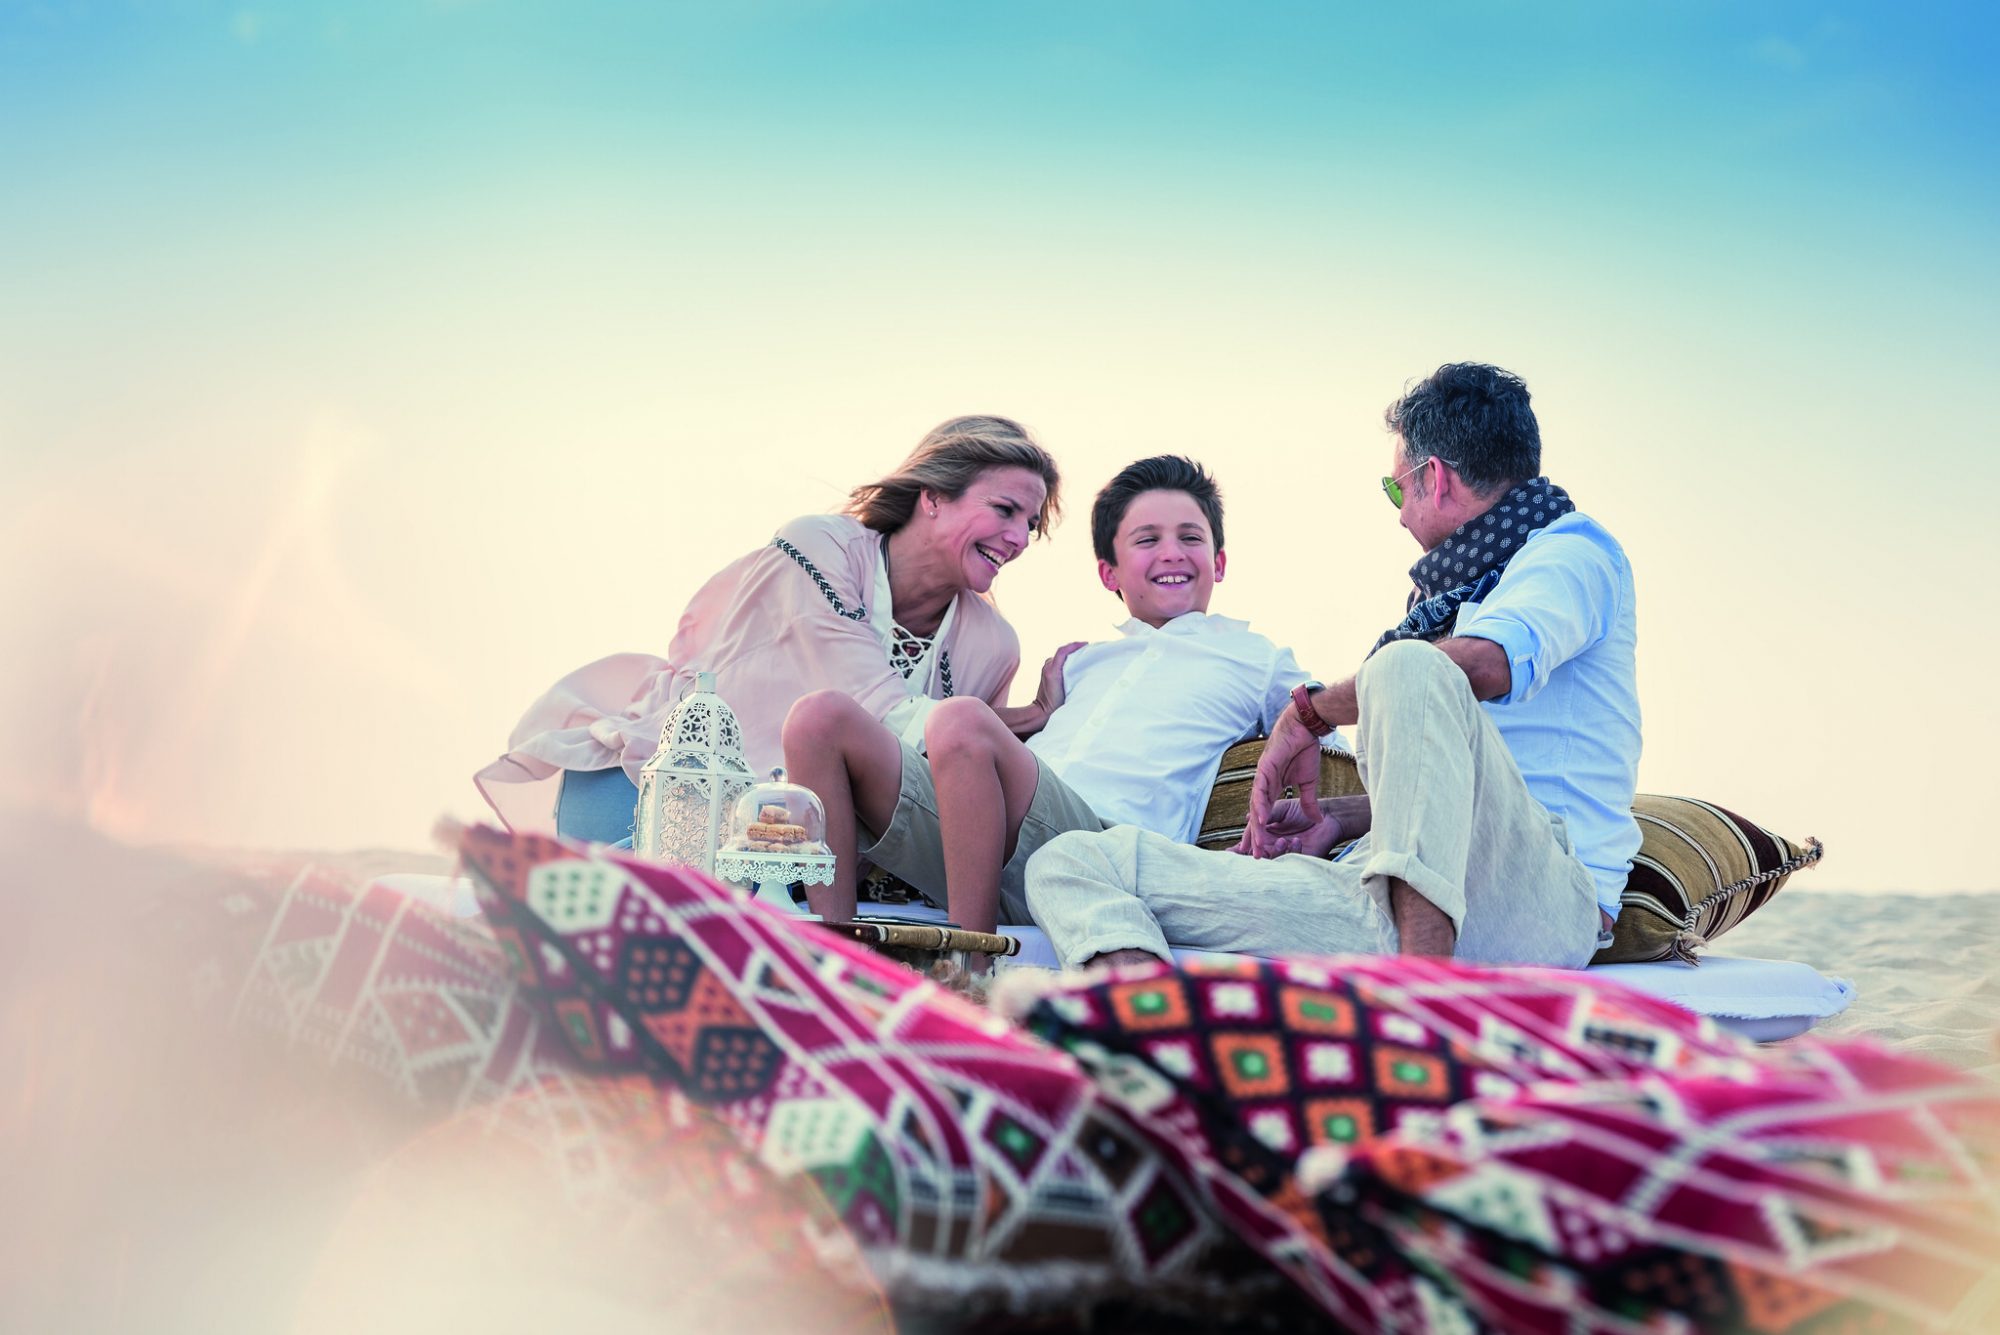 Discover Qatar and QA Holidays launch ‘Family and Friends’ packages